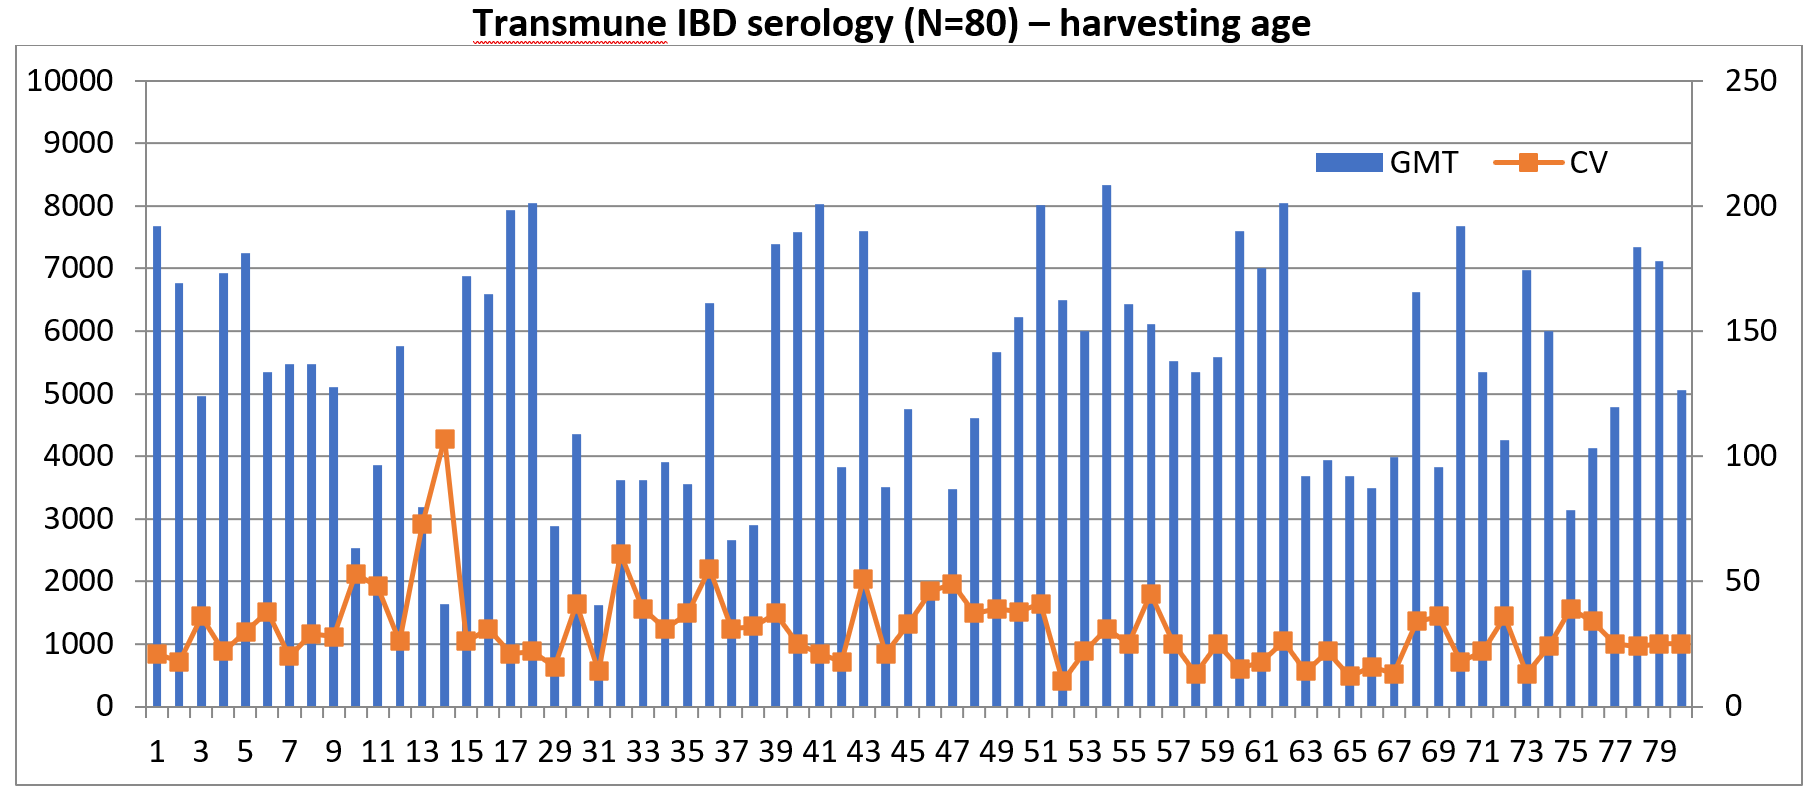 Figure 3: Harvesting age serology of Transmune-vaccinated flocks in India, 2018﻿﻿